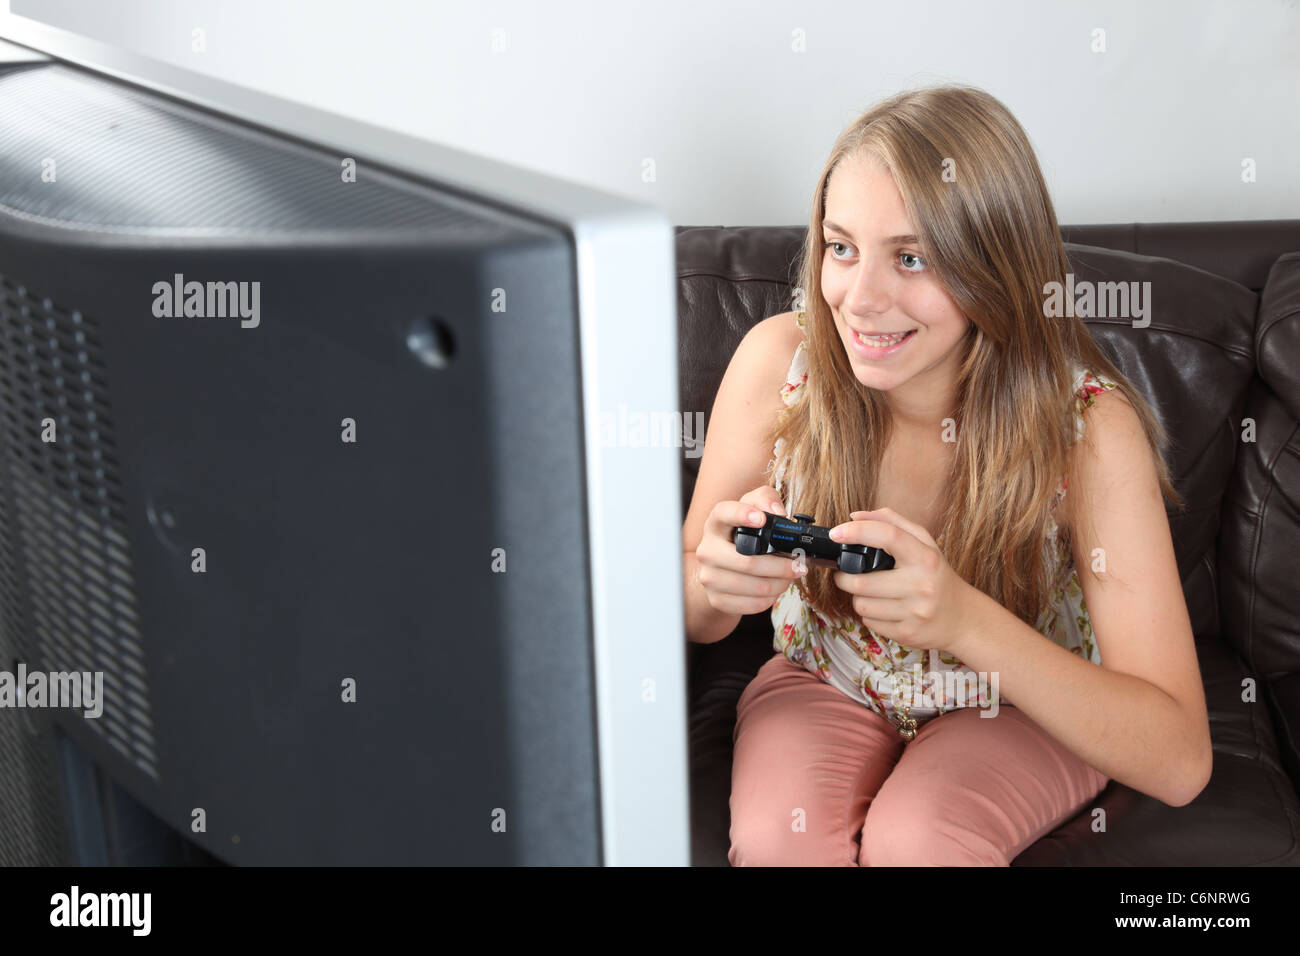 Teenage girl holding a controller smiling. Stock Photo